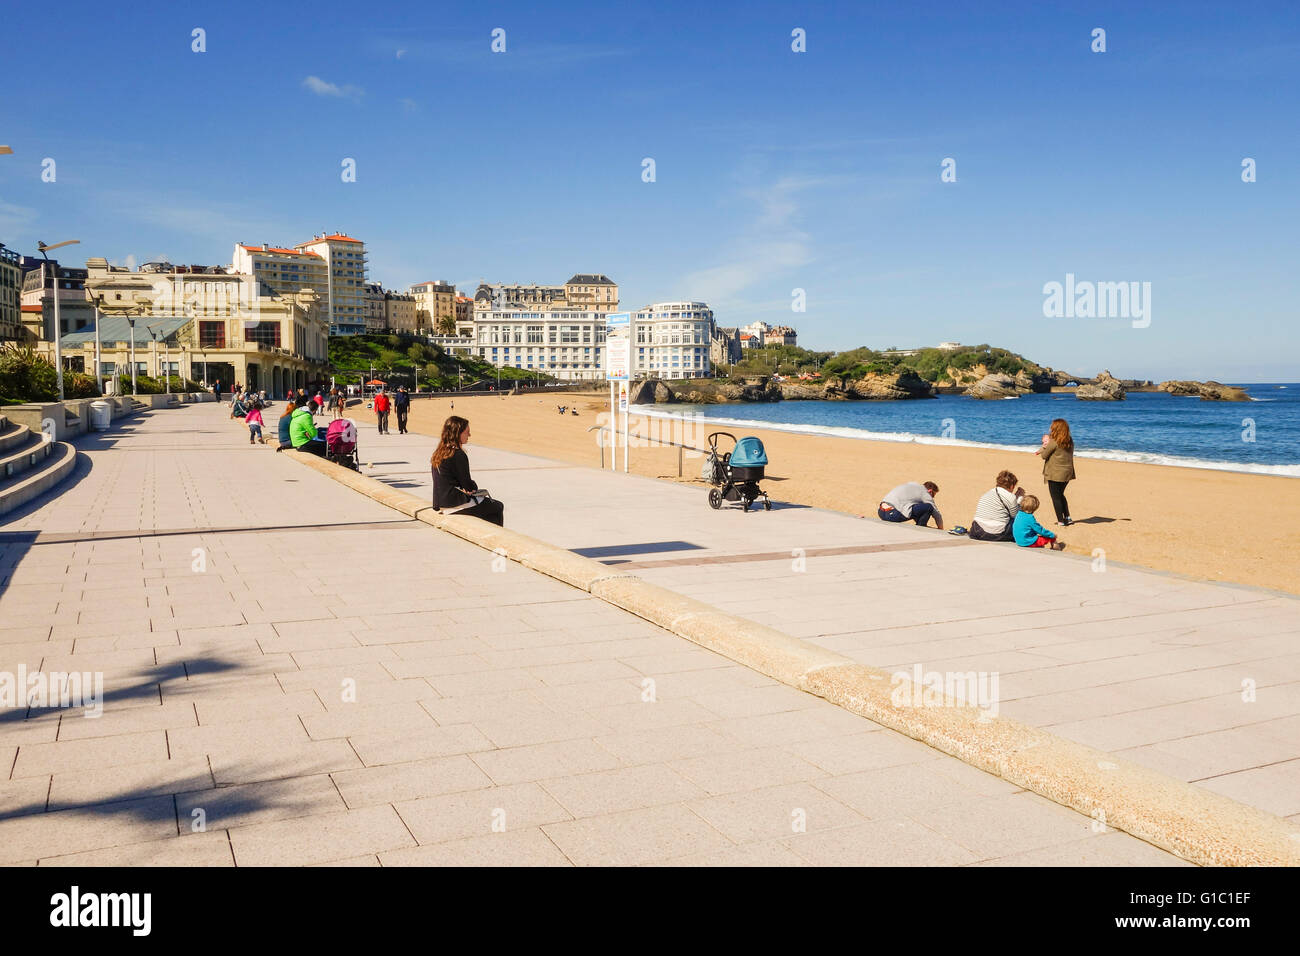 Grande plage, walkway boulevard, Biarritz. Aquitaine, french basque country, France. Stock Photo